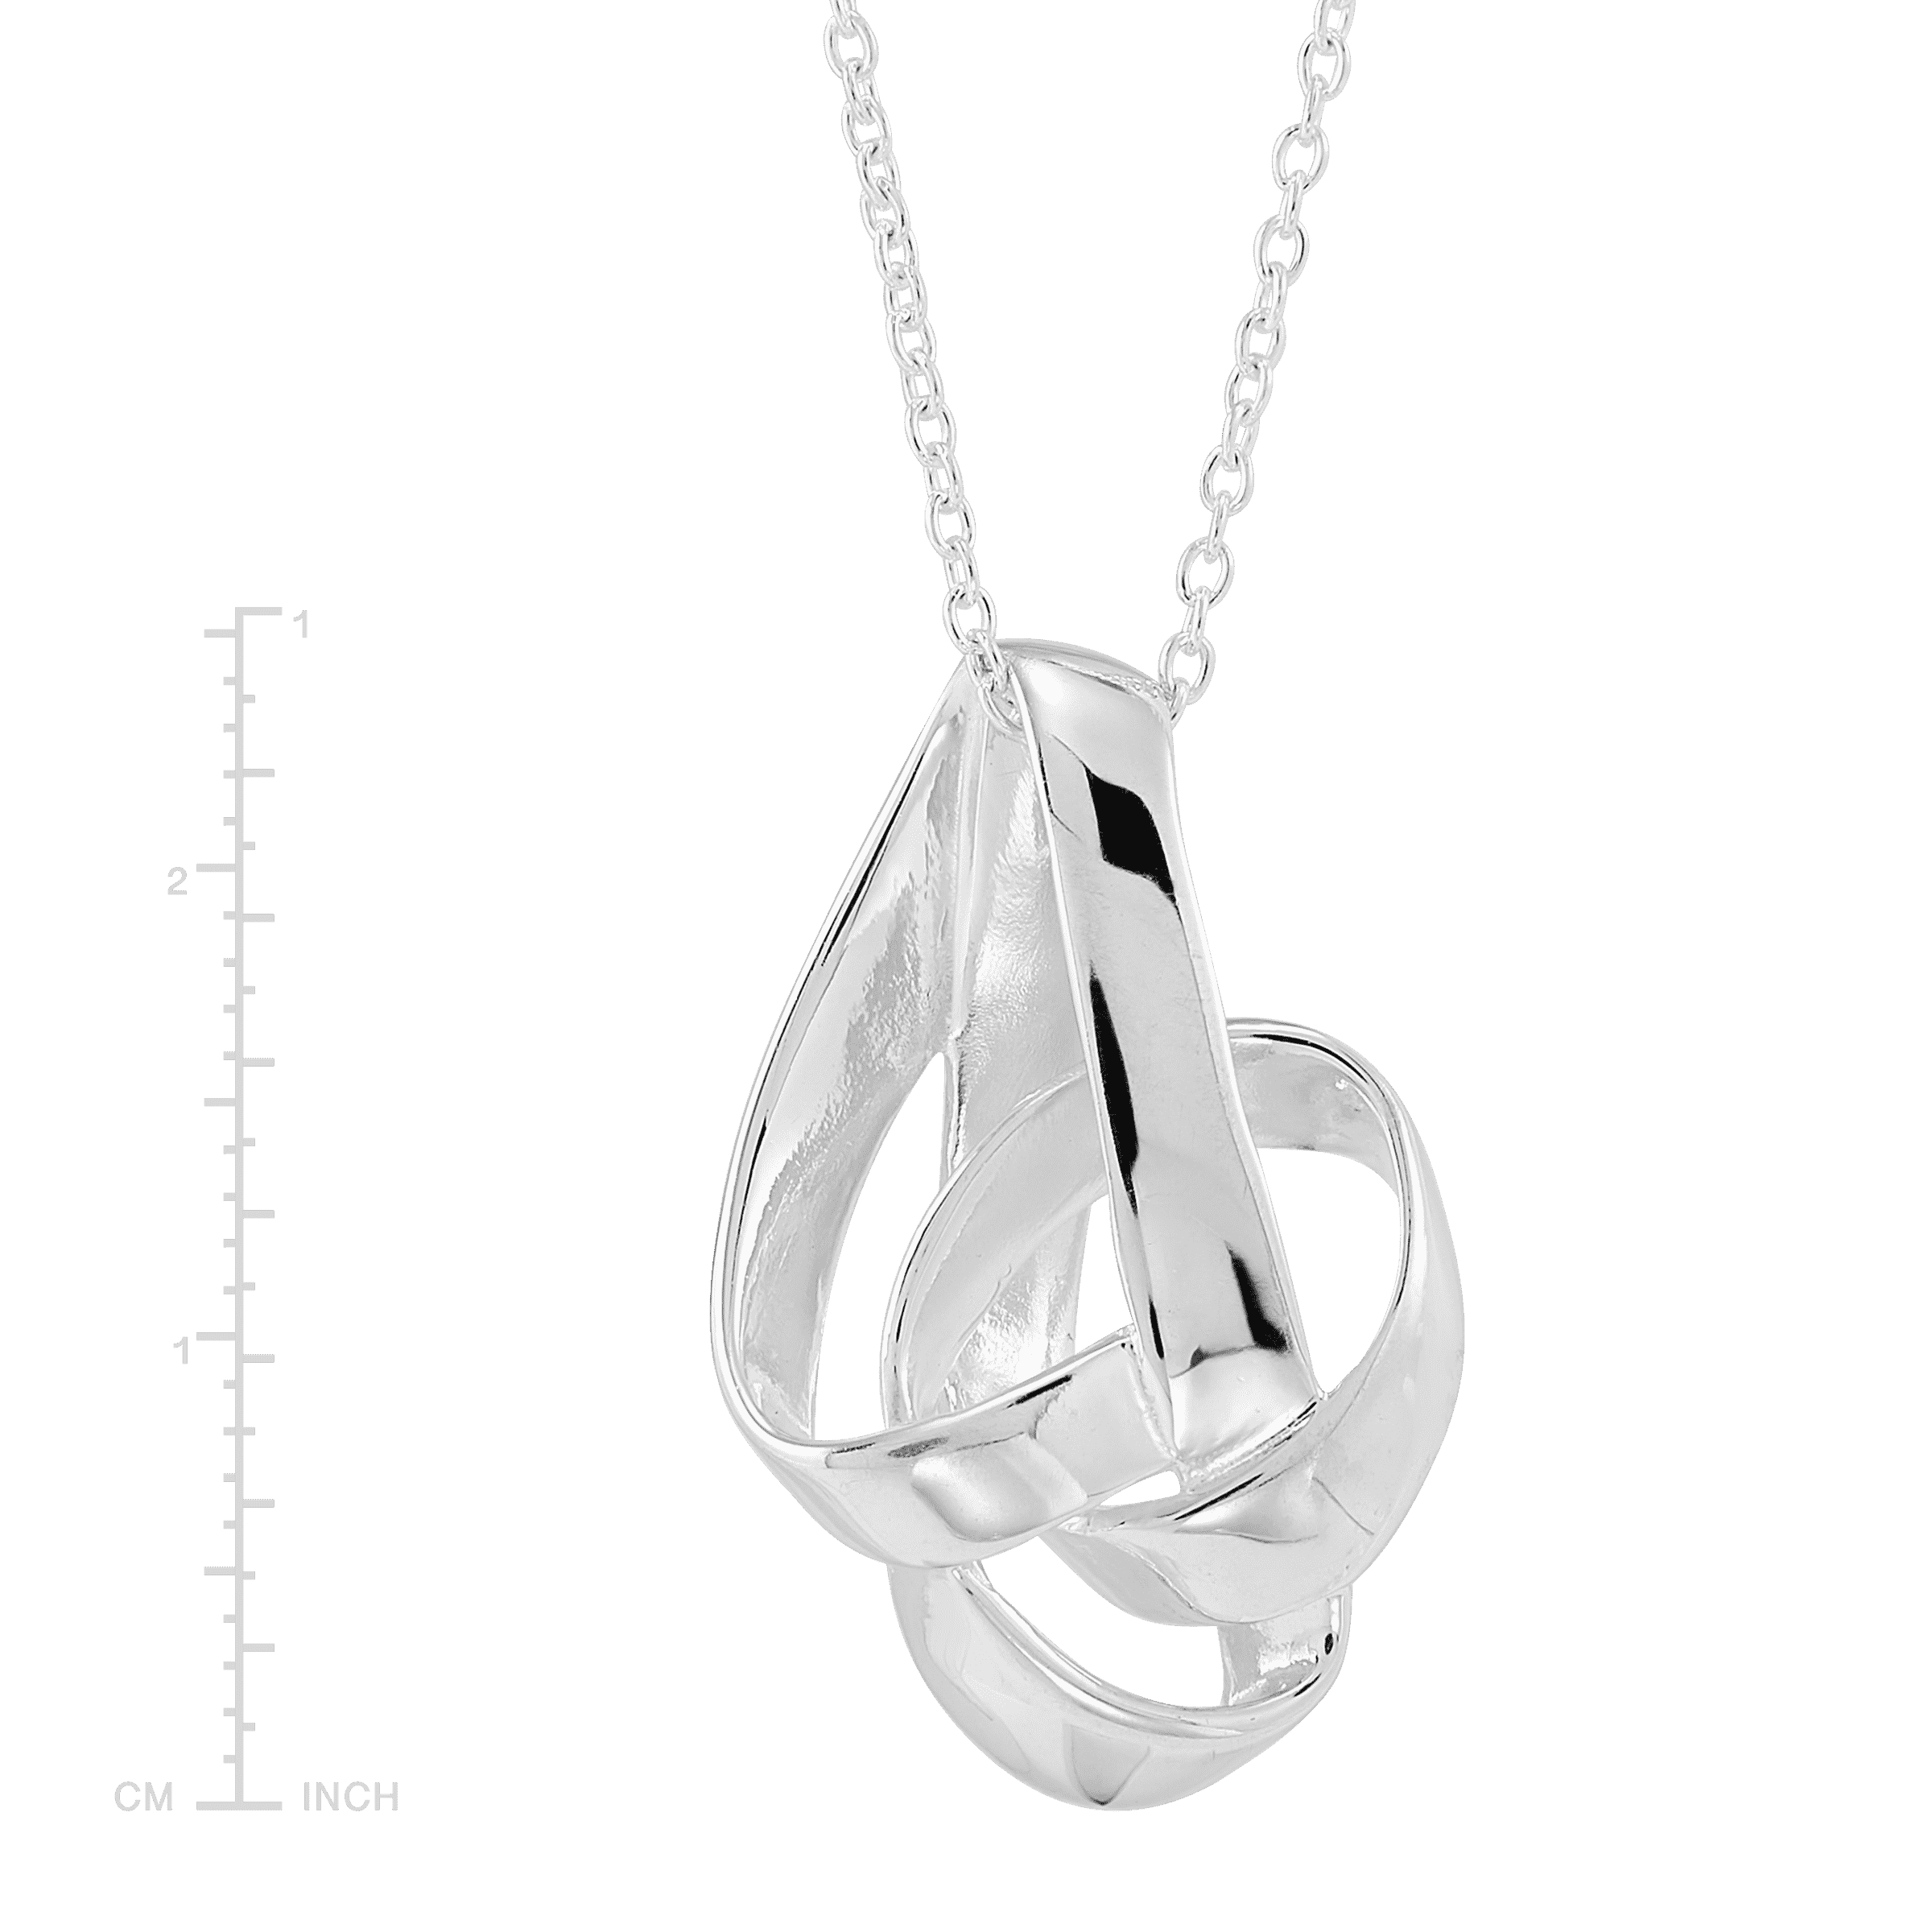 Silpada 'Tied Up' Pendant Necklace in Sterling Silver, 16